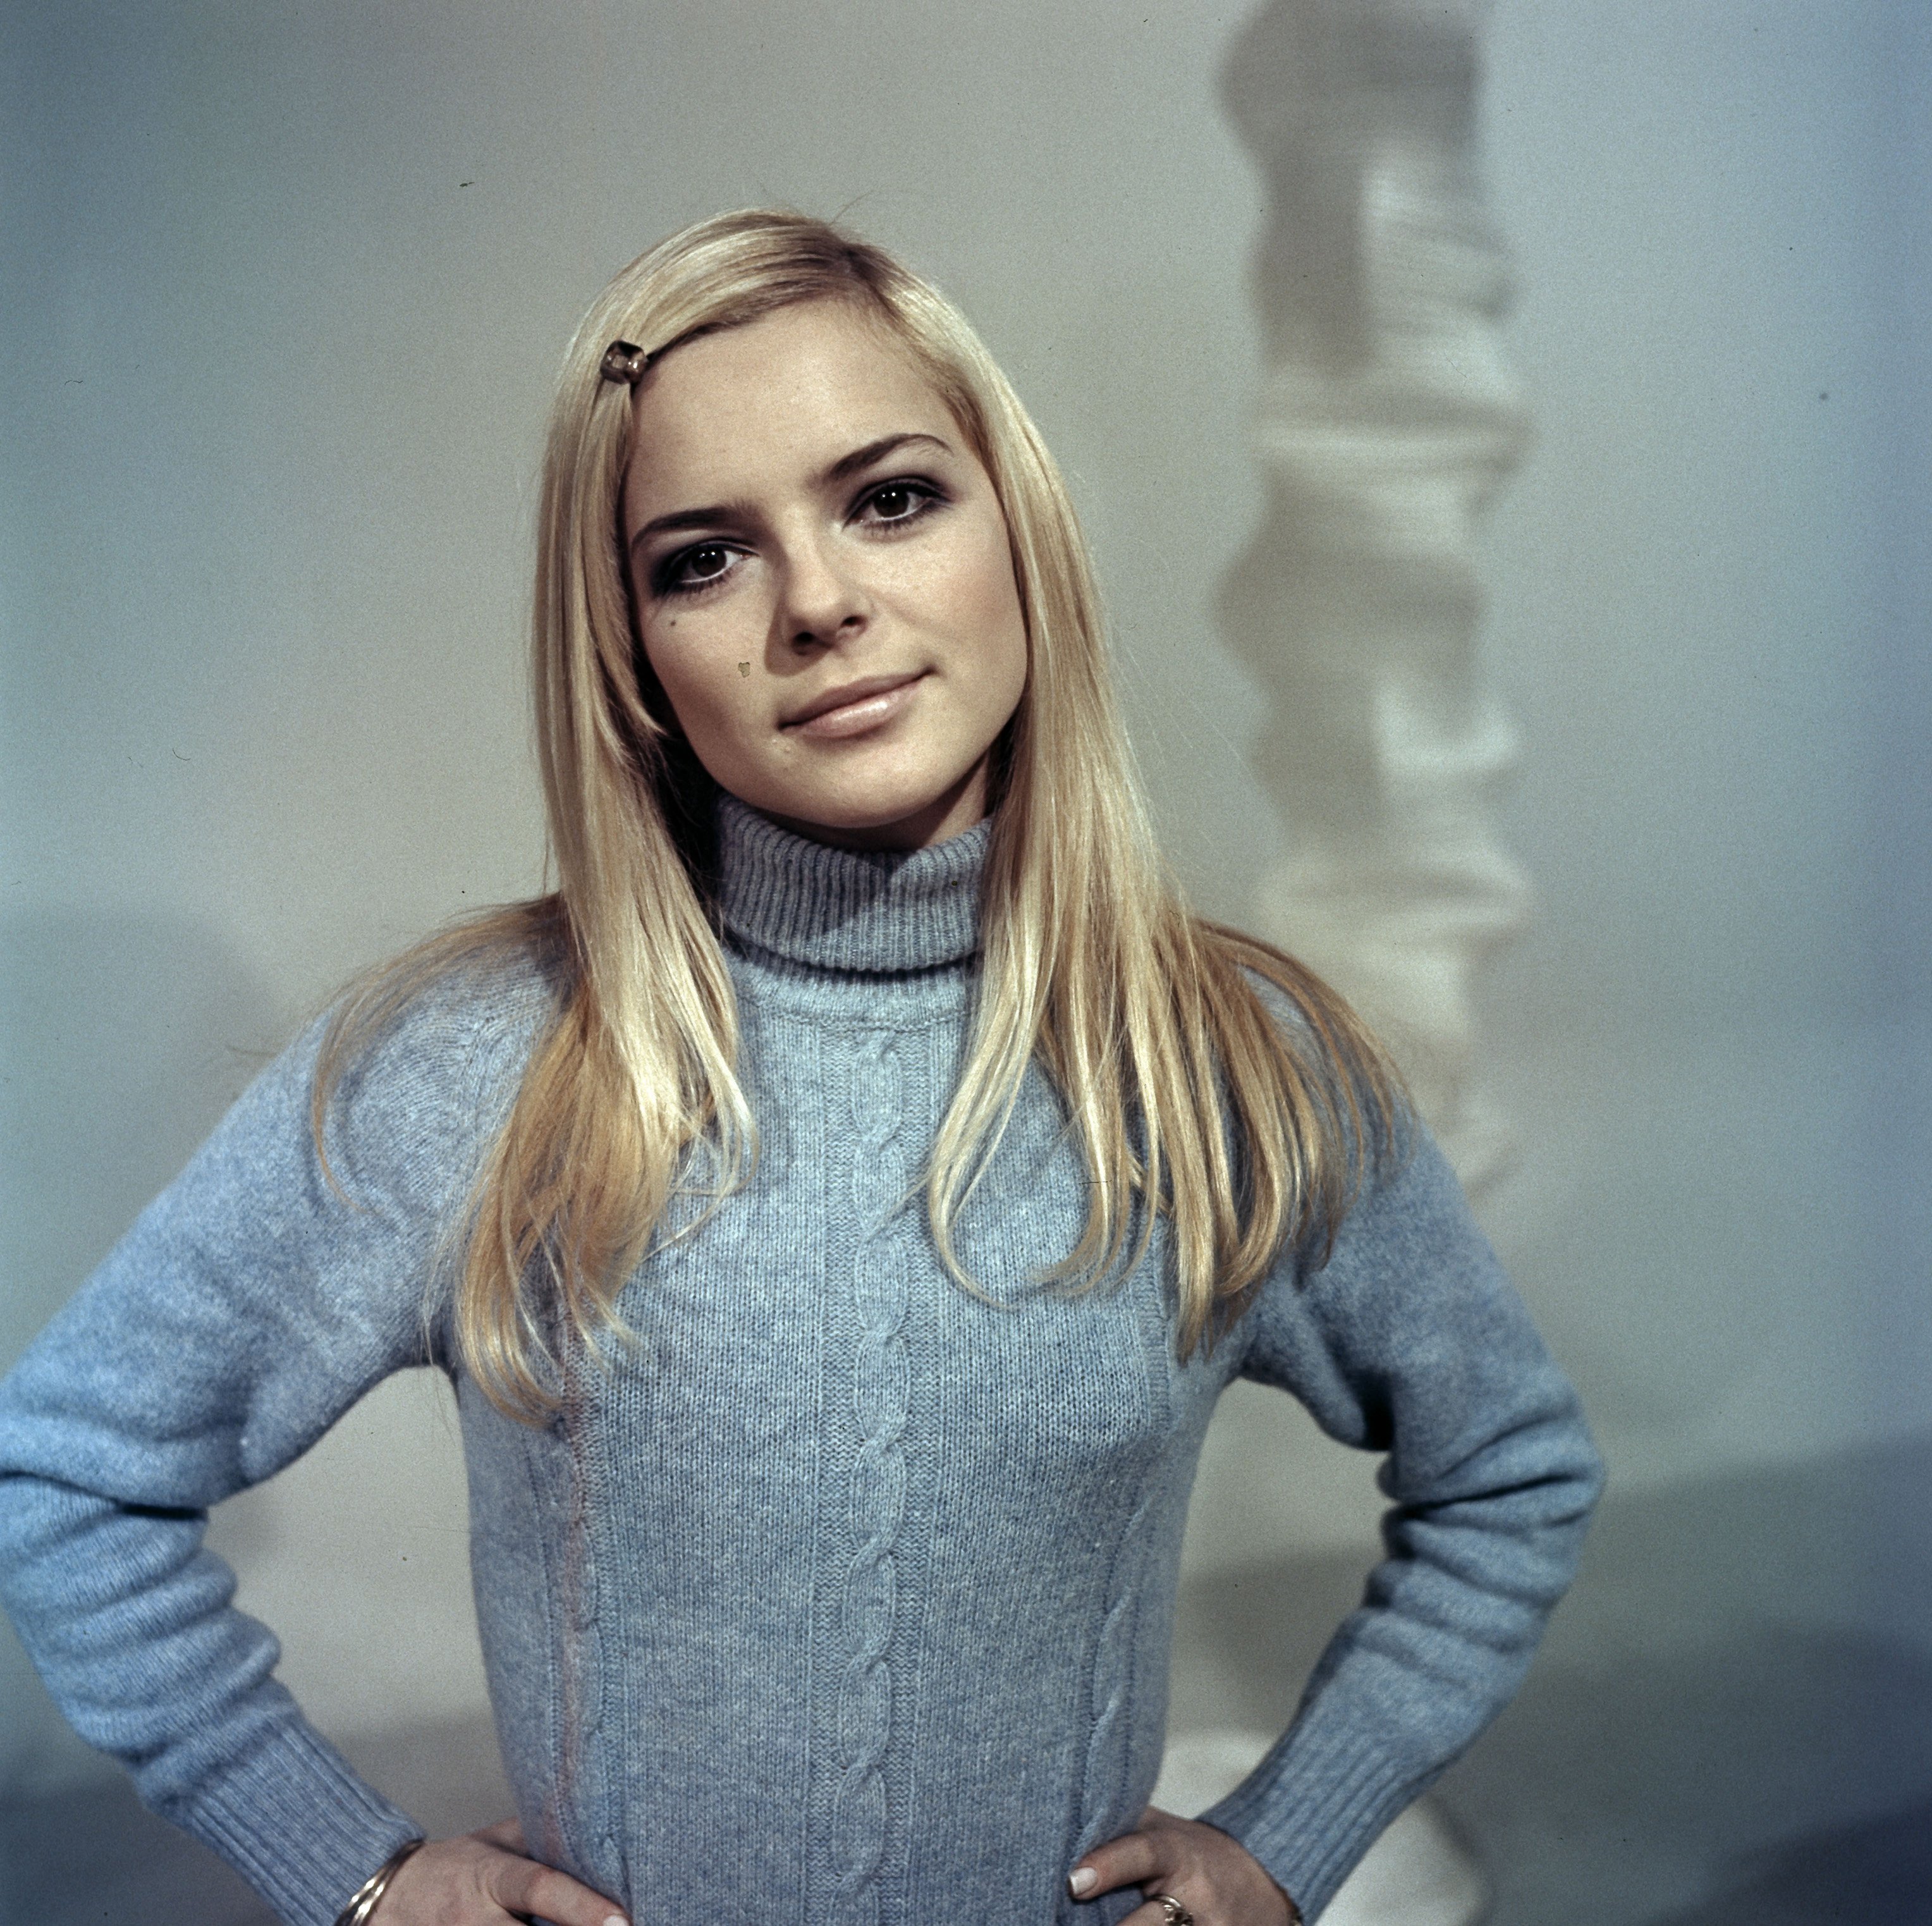 French star singer France Gall dies aged 70